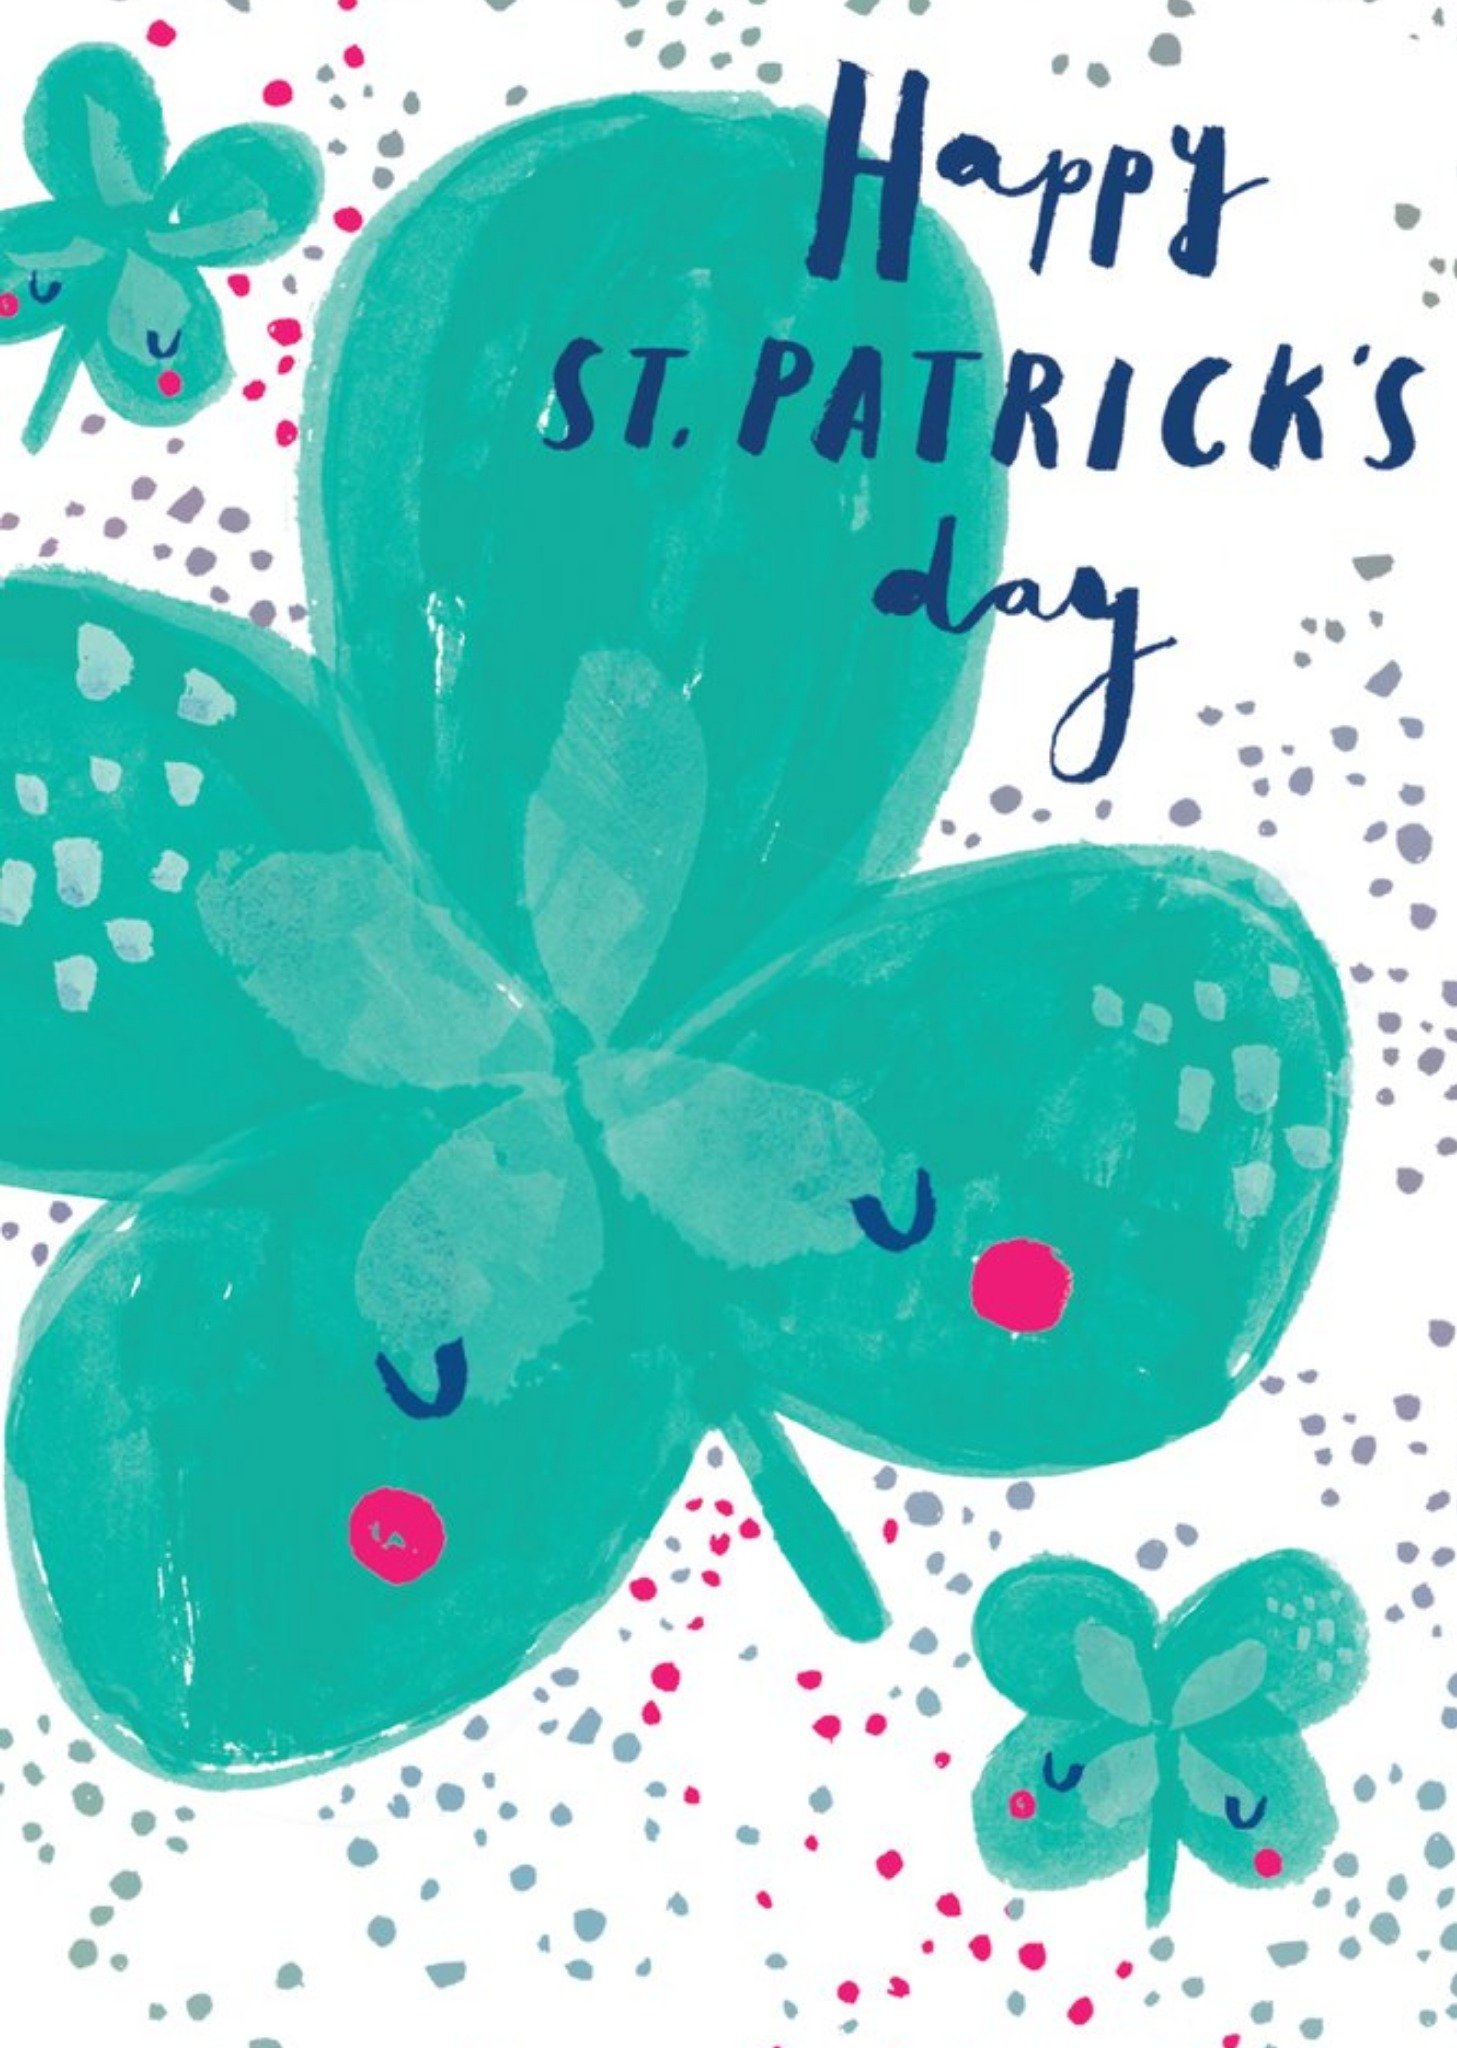 Moonpig Hotchpotch Four Leaf Clover Luck St Patricks Day Card, Large